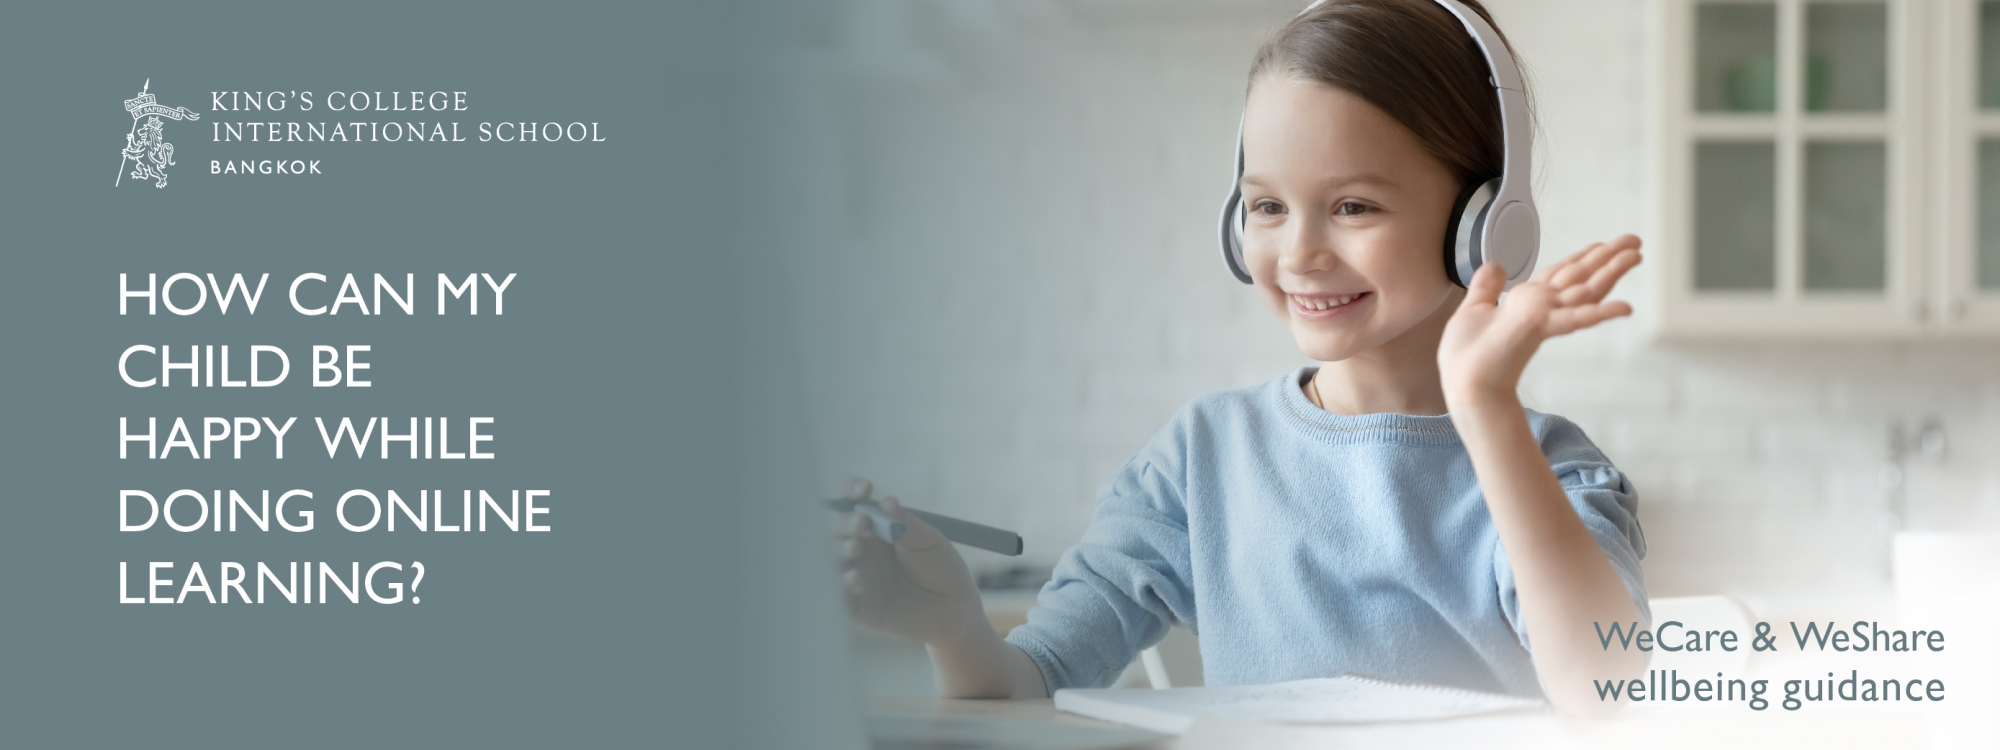 How can my child be happy while doing online learning?